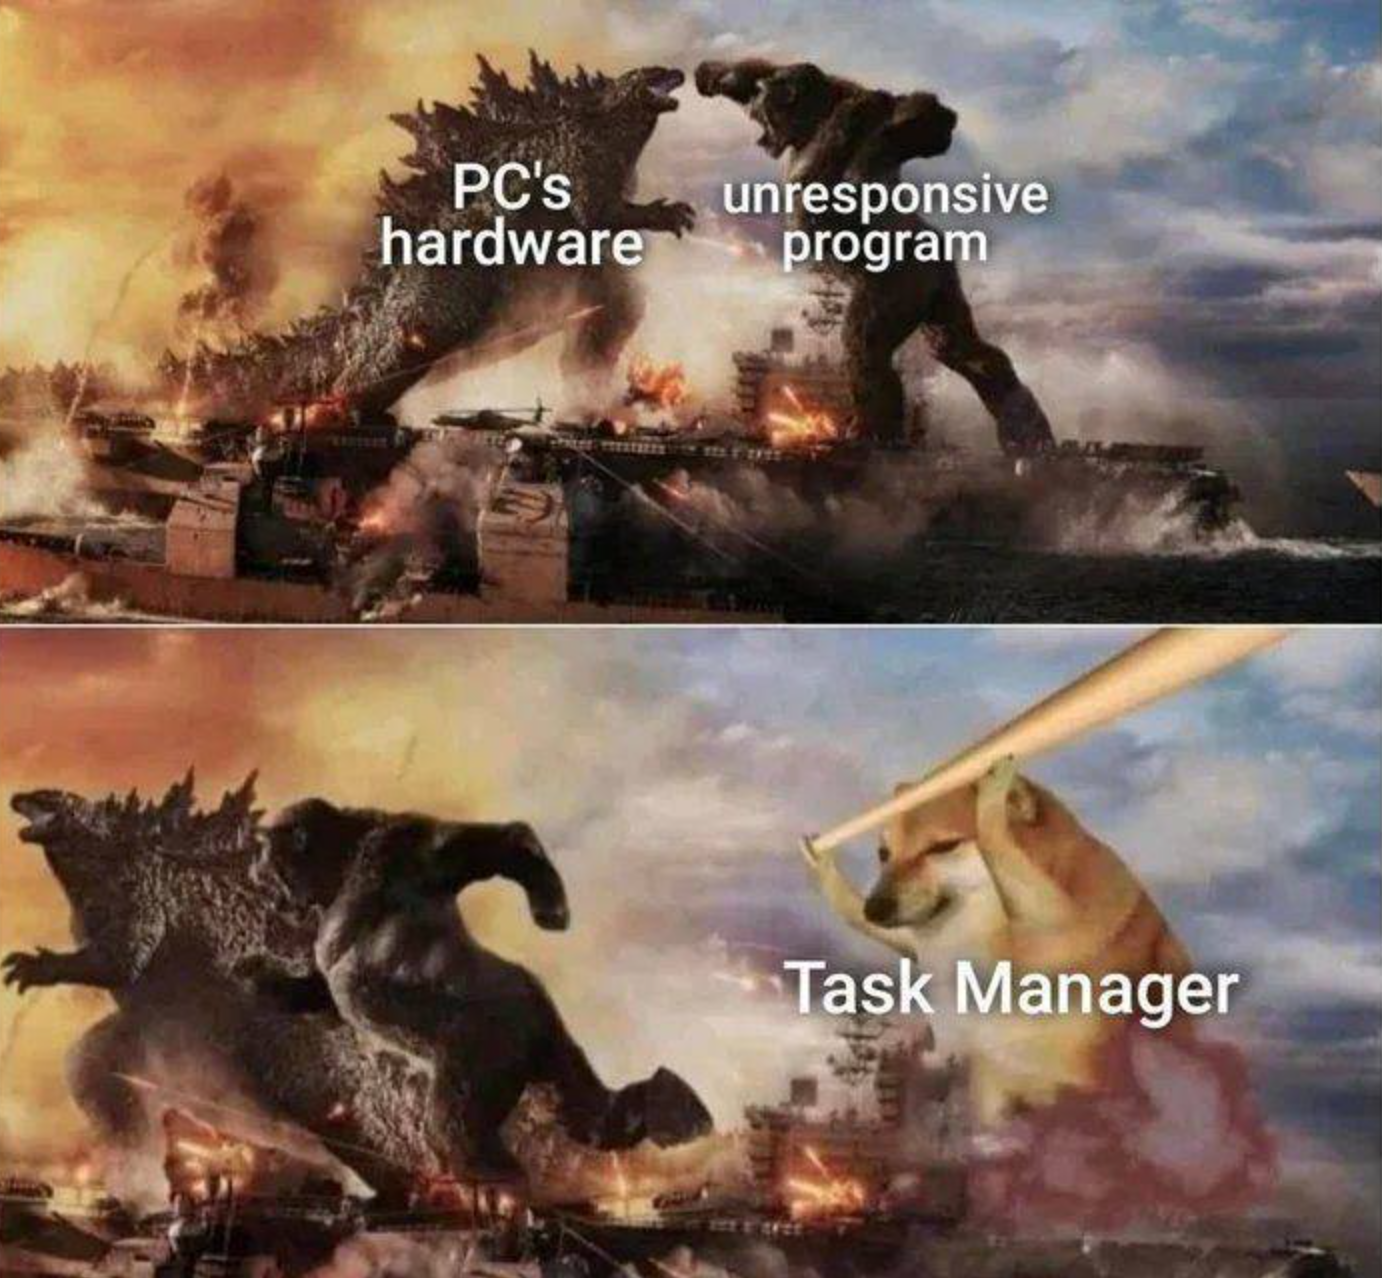 gaming memes and pics - Pc's hardware unresponsive program Task Manager